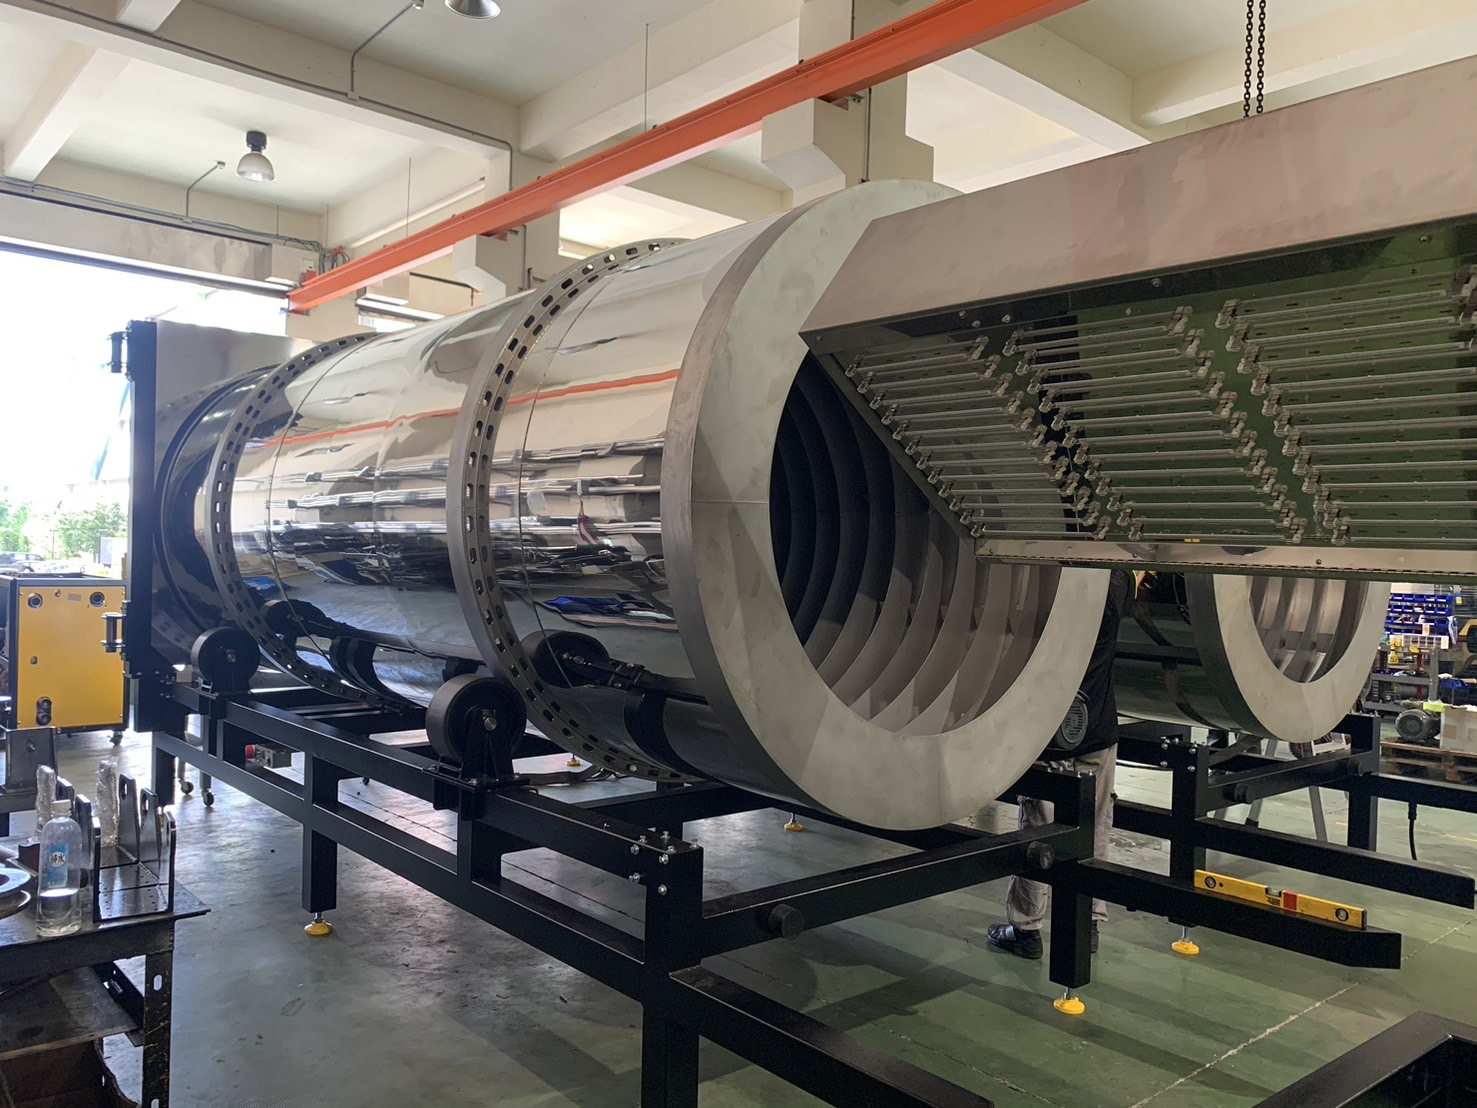 Industrial infrared rotary dryer for plastics processing, featuring a cylindrical design with internal heating elements and a reflective exterior on a support frame.